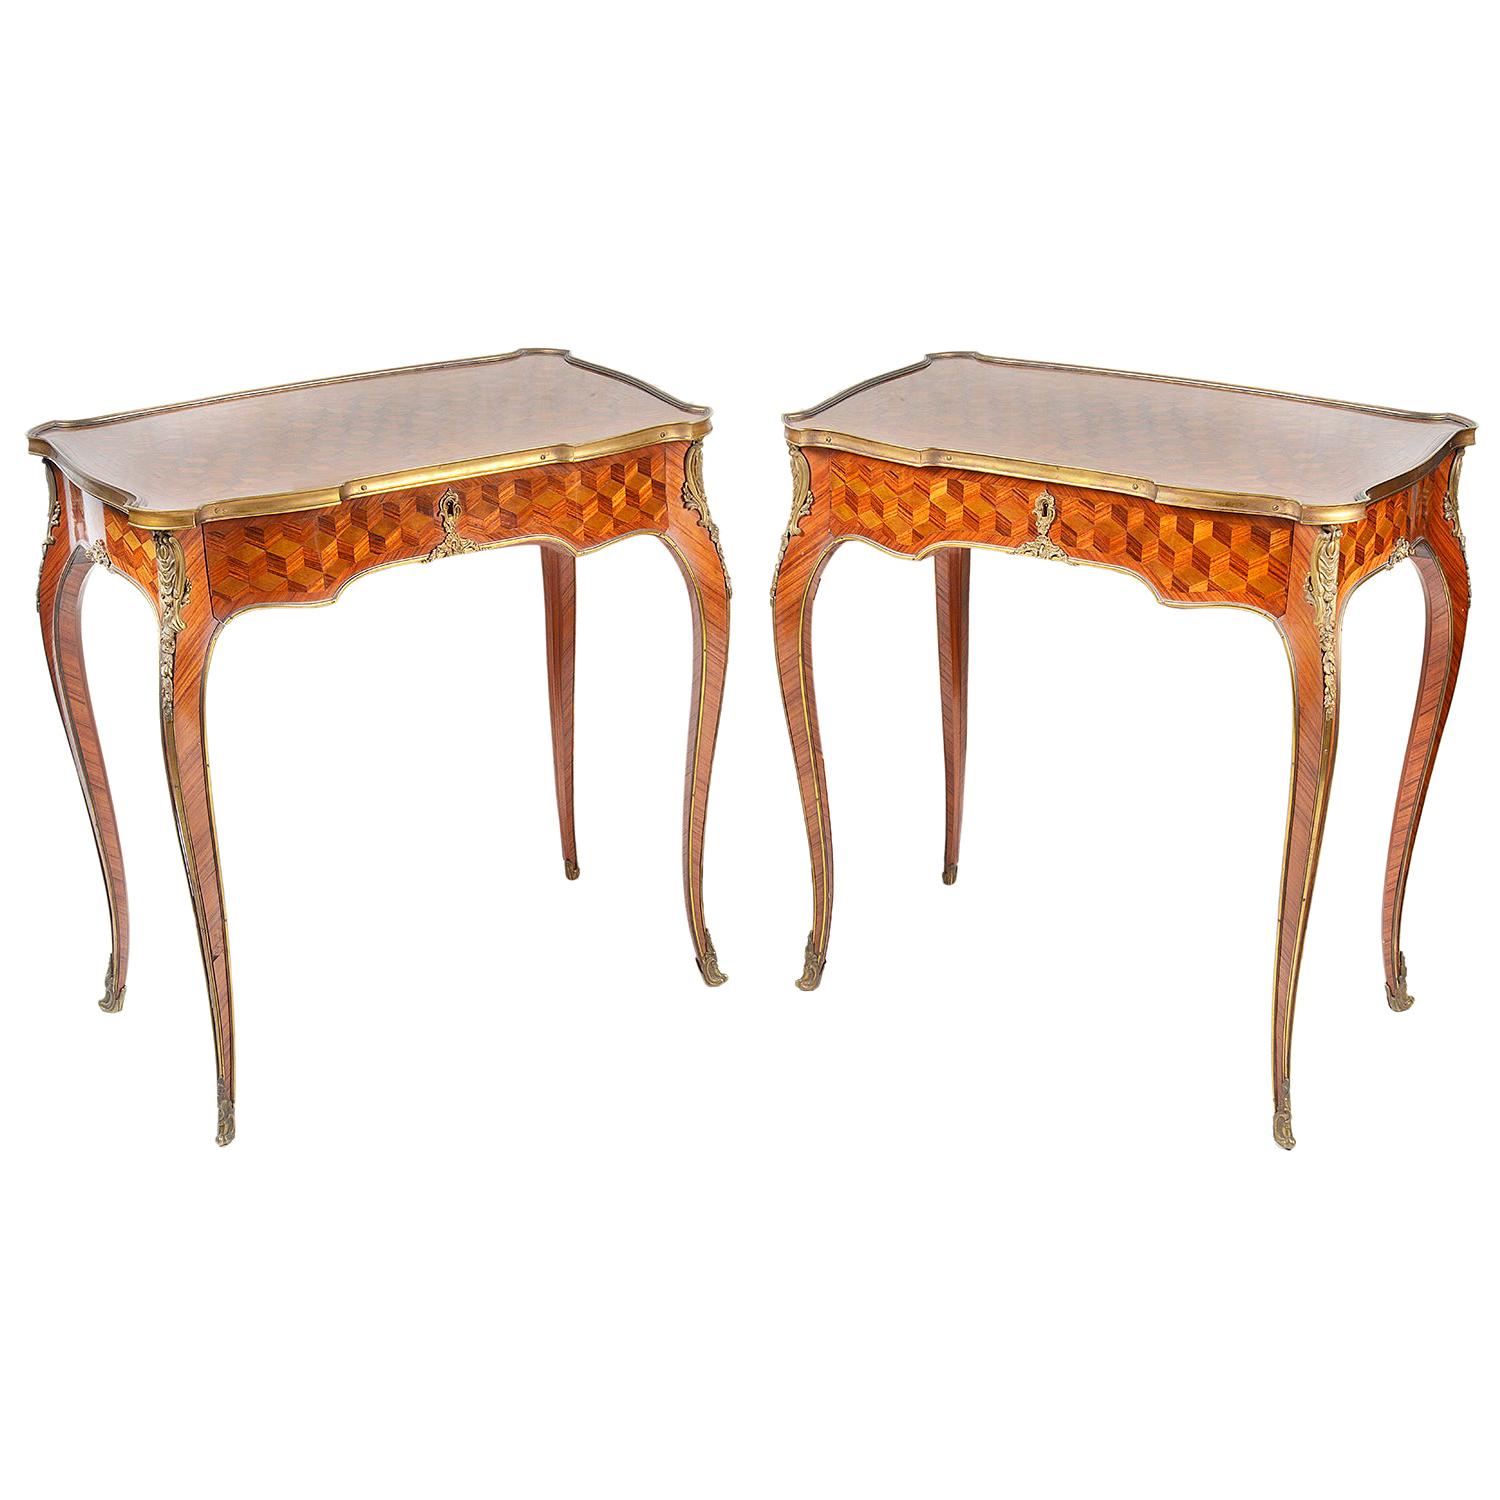 Pair of 19th Century Louis XVI Style Side Tables